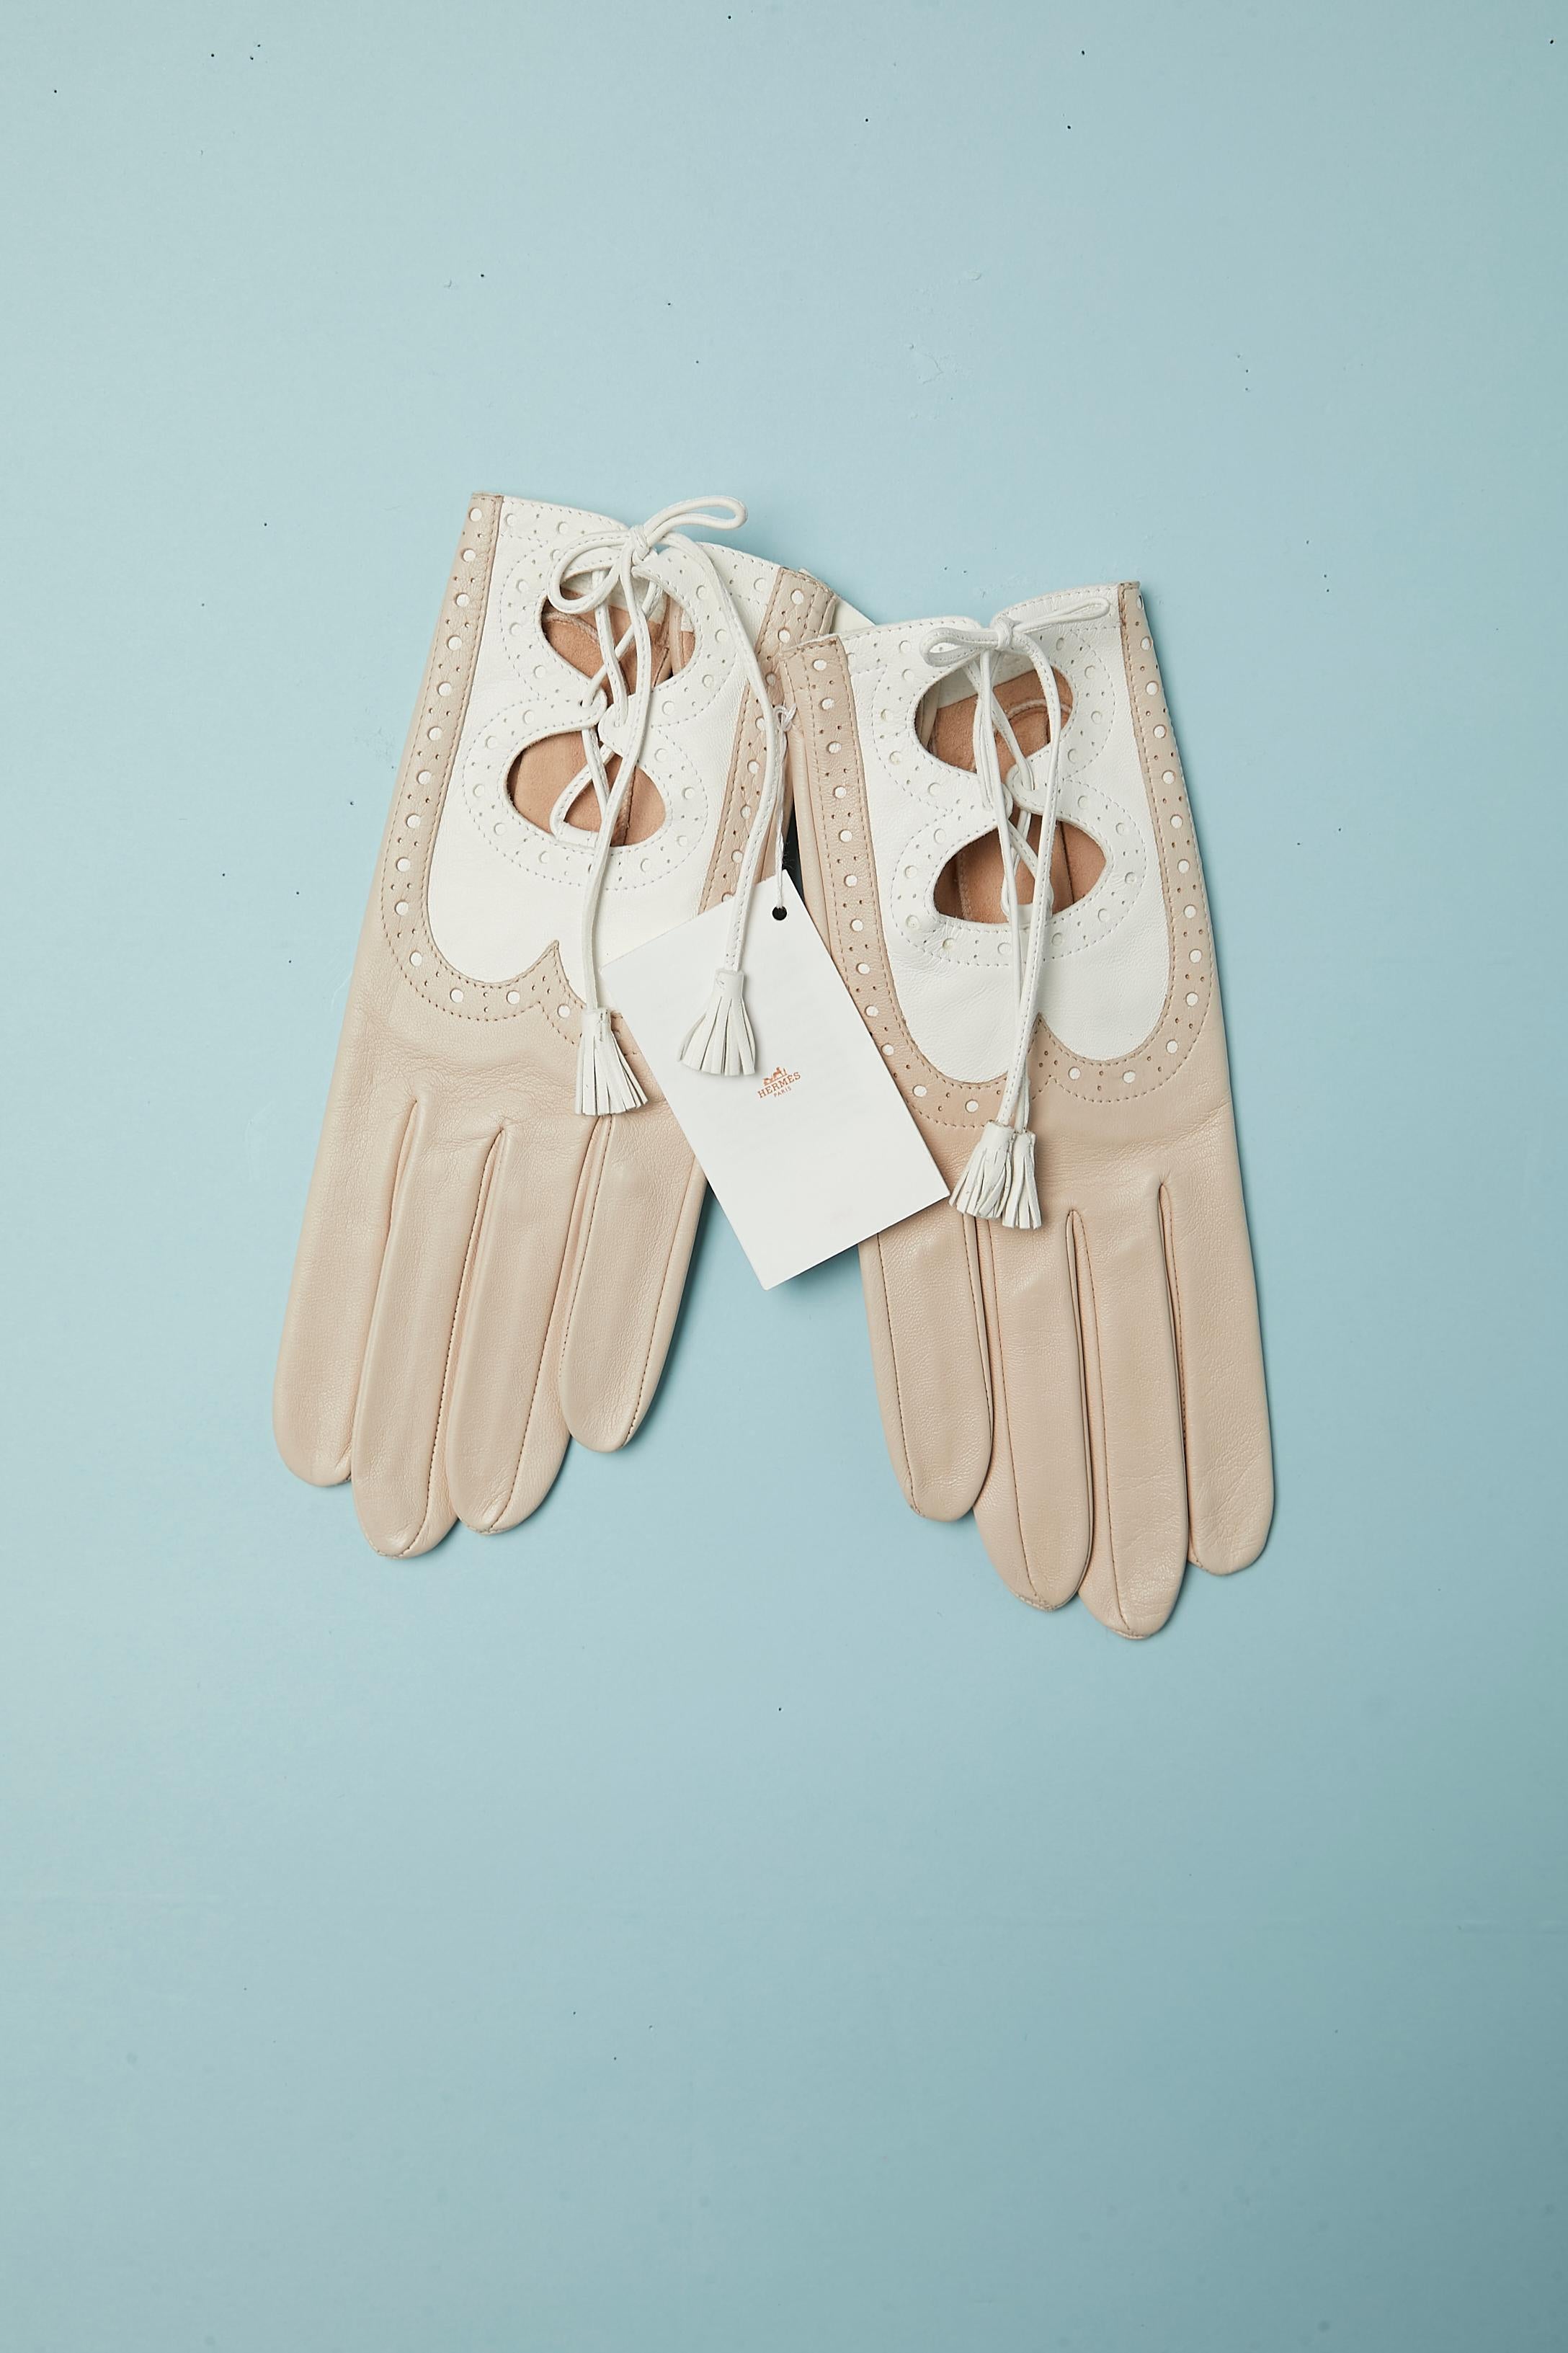 Beige and white leather gloves with cut-work, leather laces and white leather pompom. Snap cover with leather inside the hand.
SIZE 7 1/2
New with tag